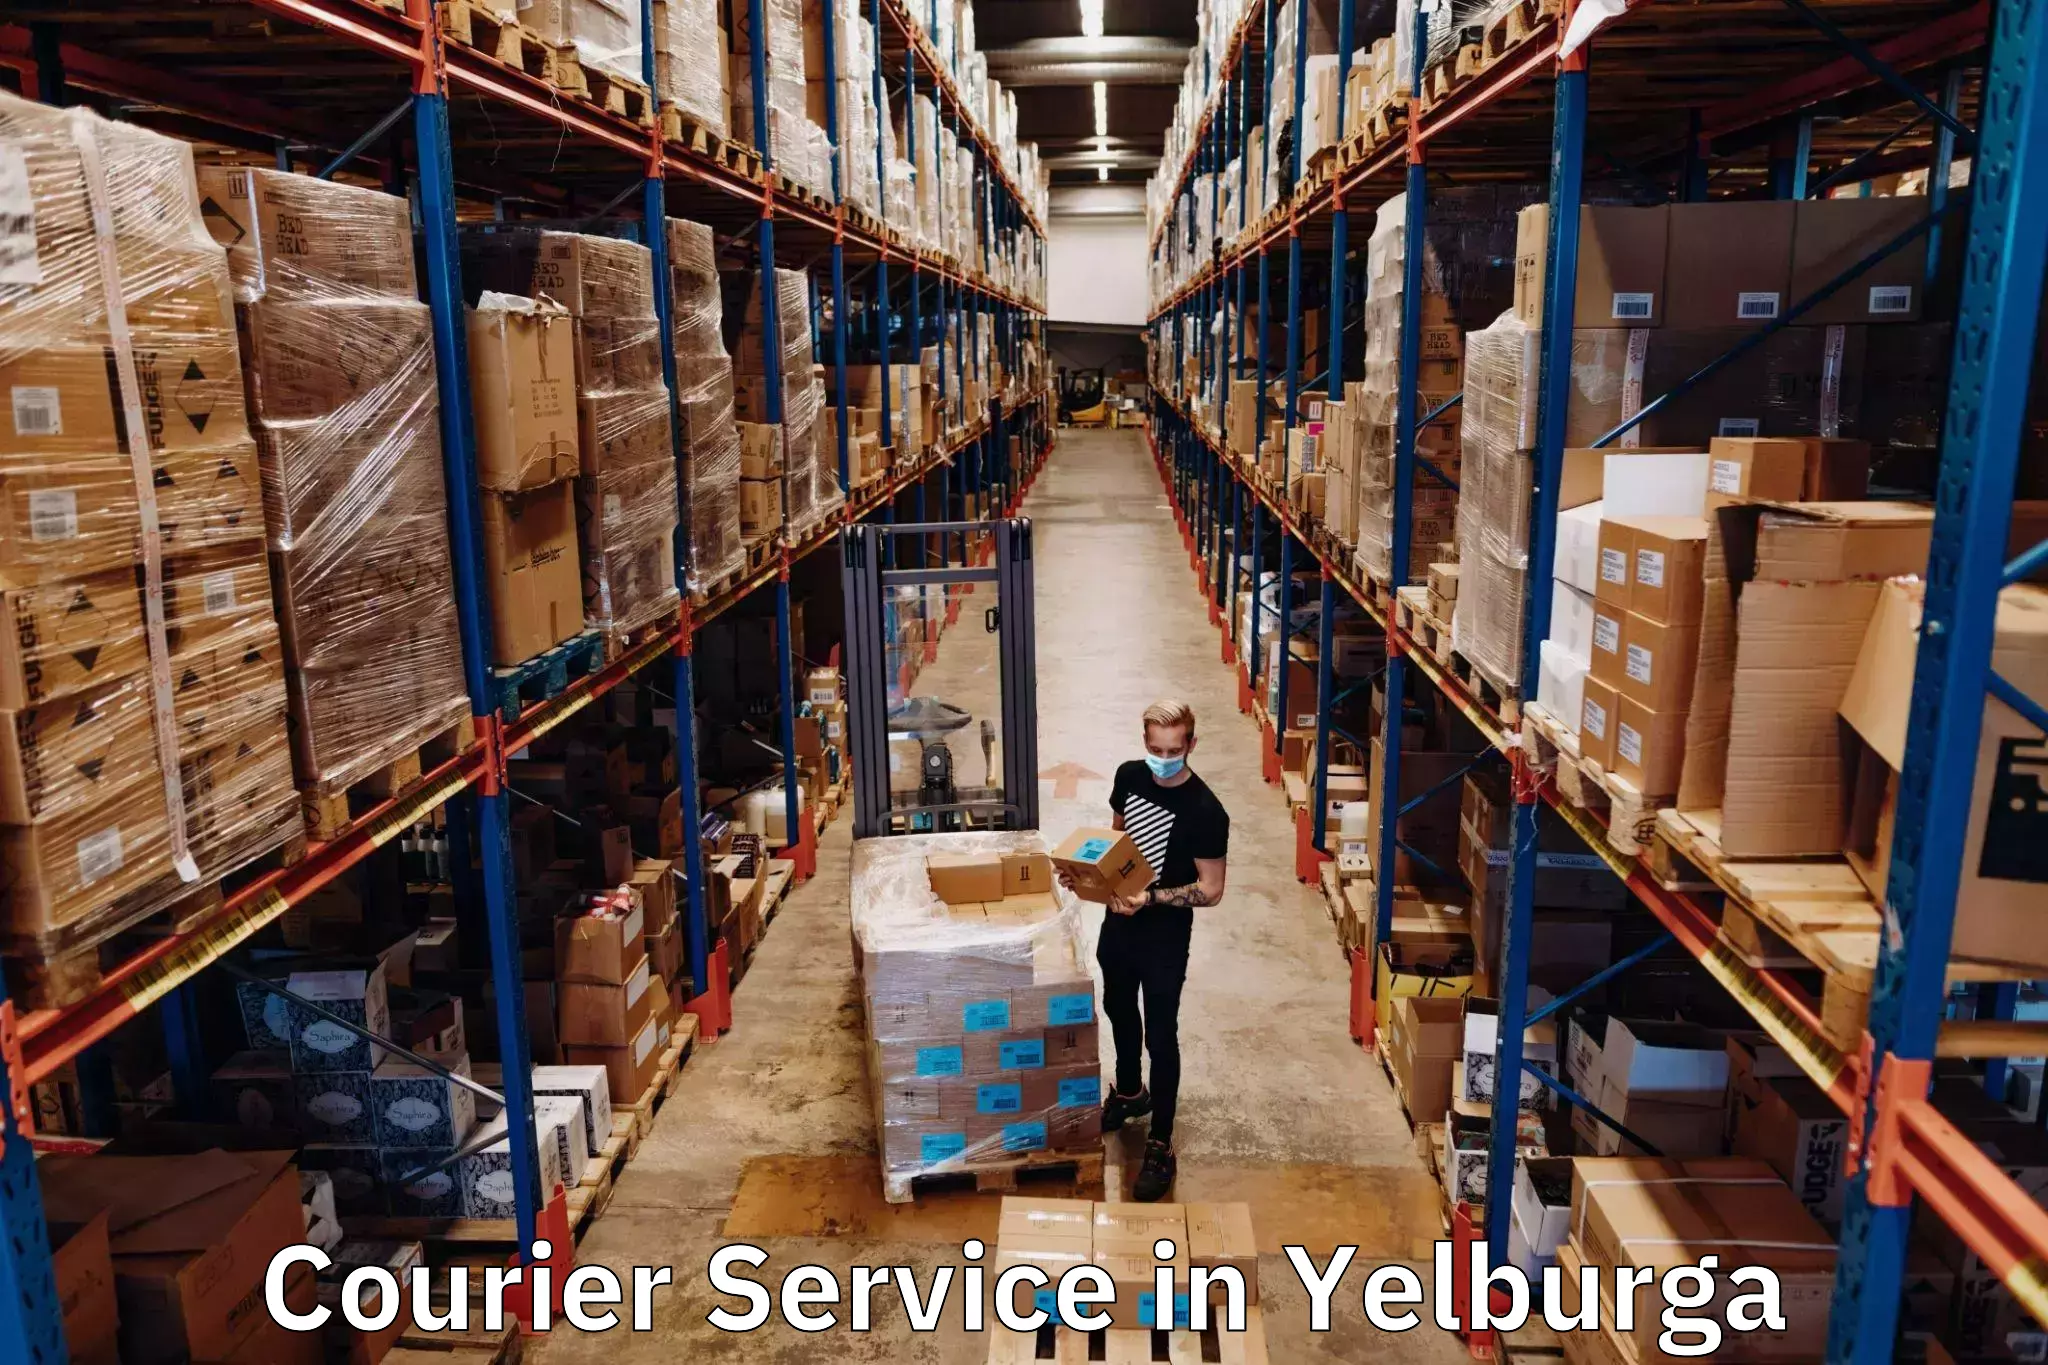 Parcel service for businesses in Yelburga